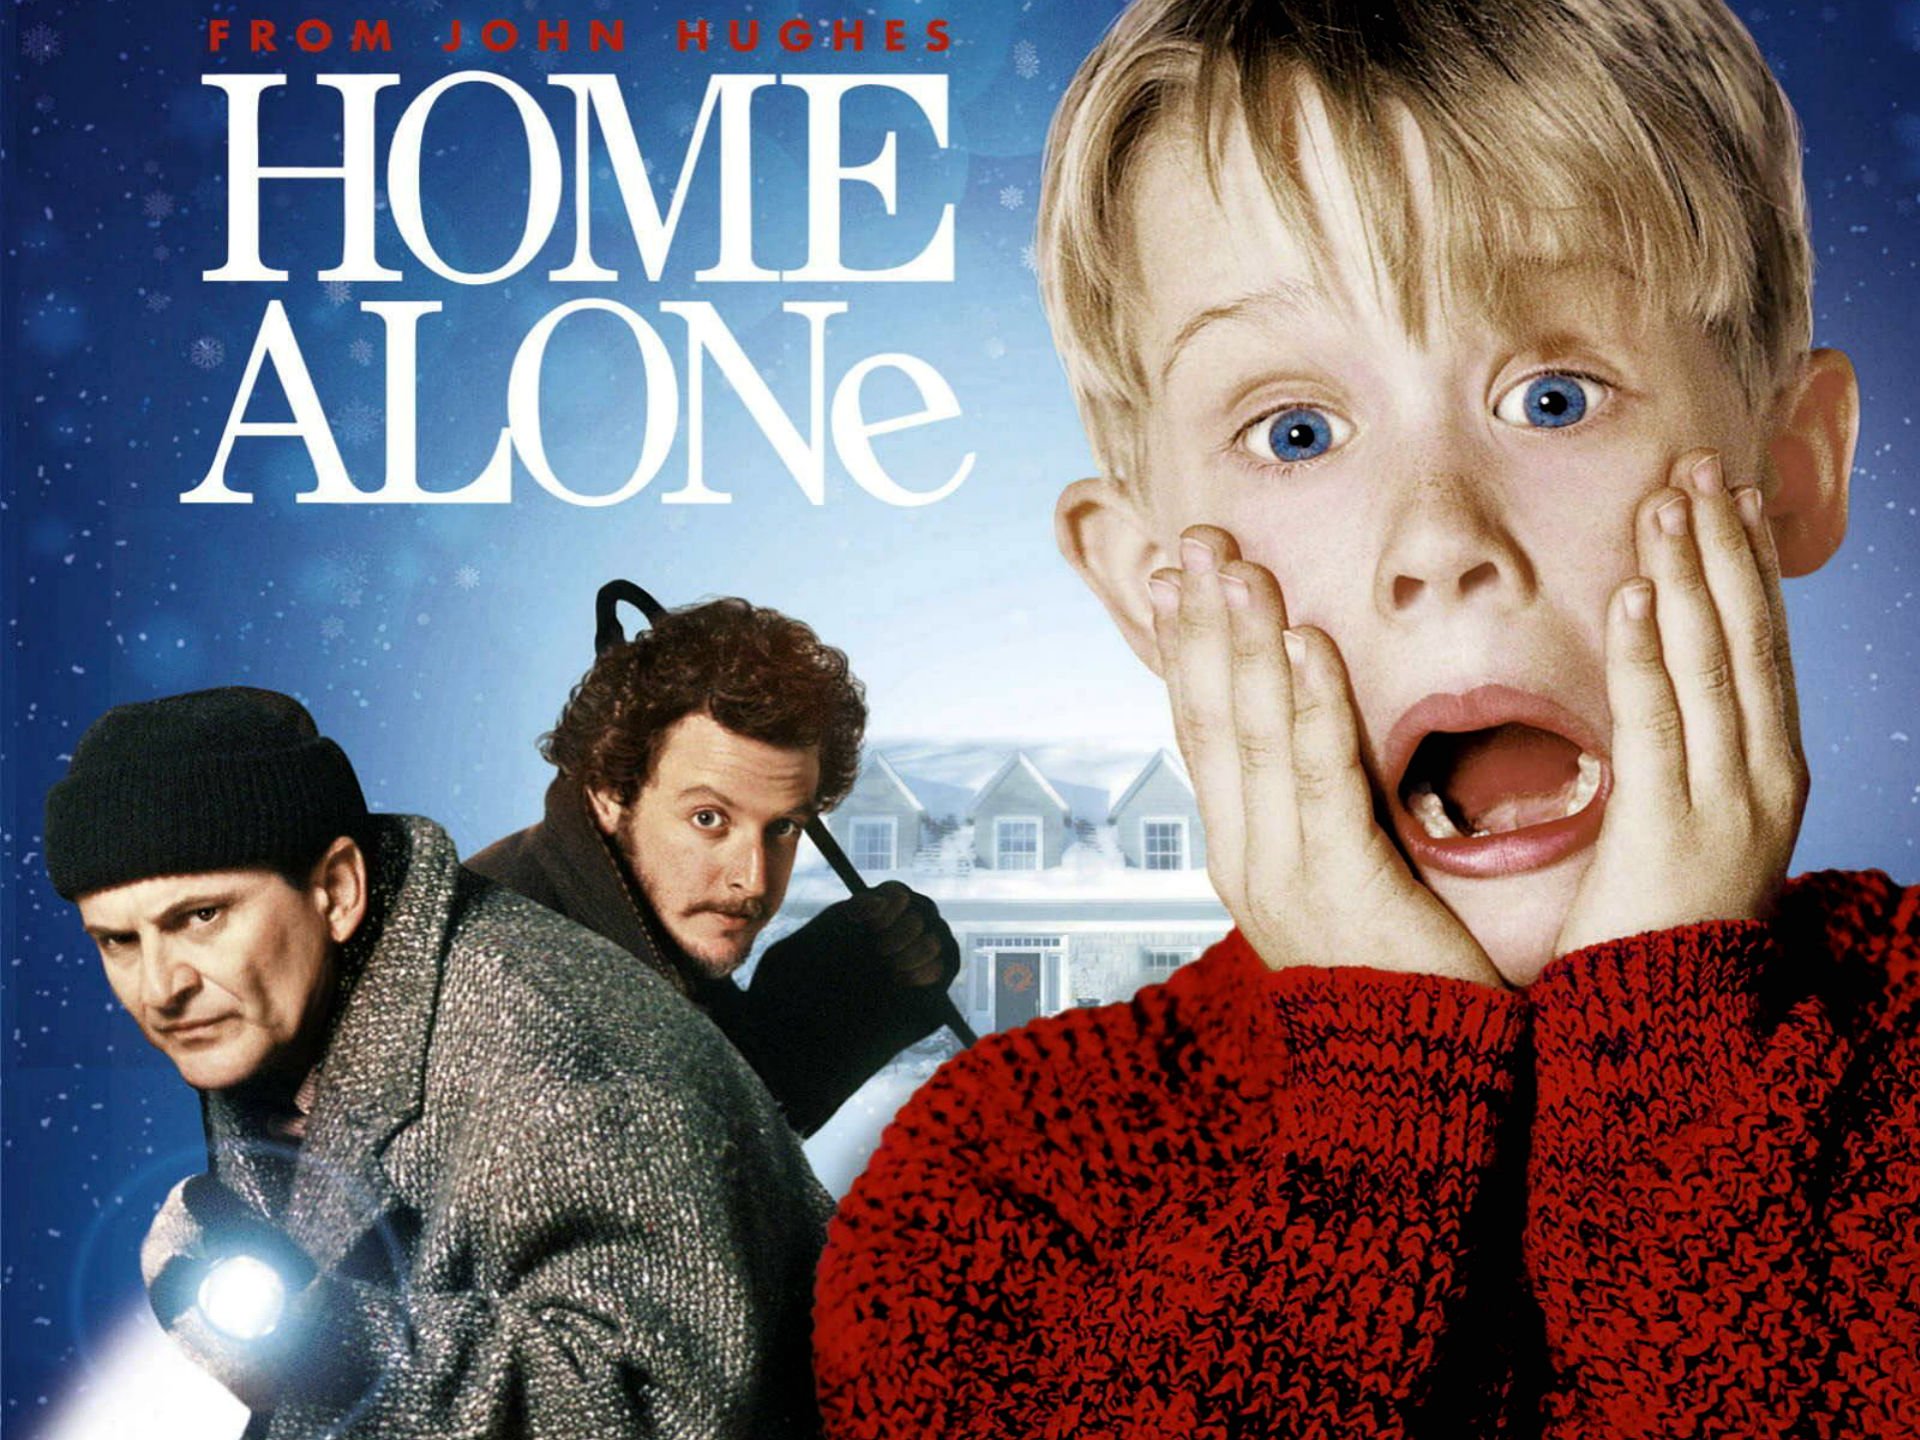 home alone, Comedy, Family, Christmas, Home, Alone Wallpapers HD